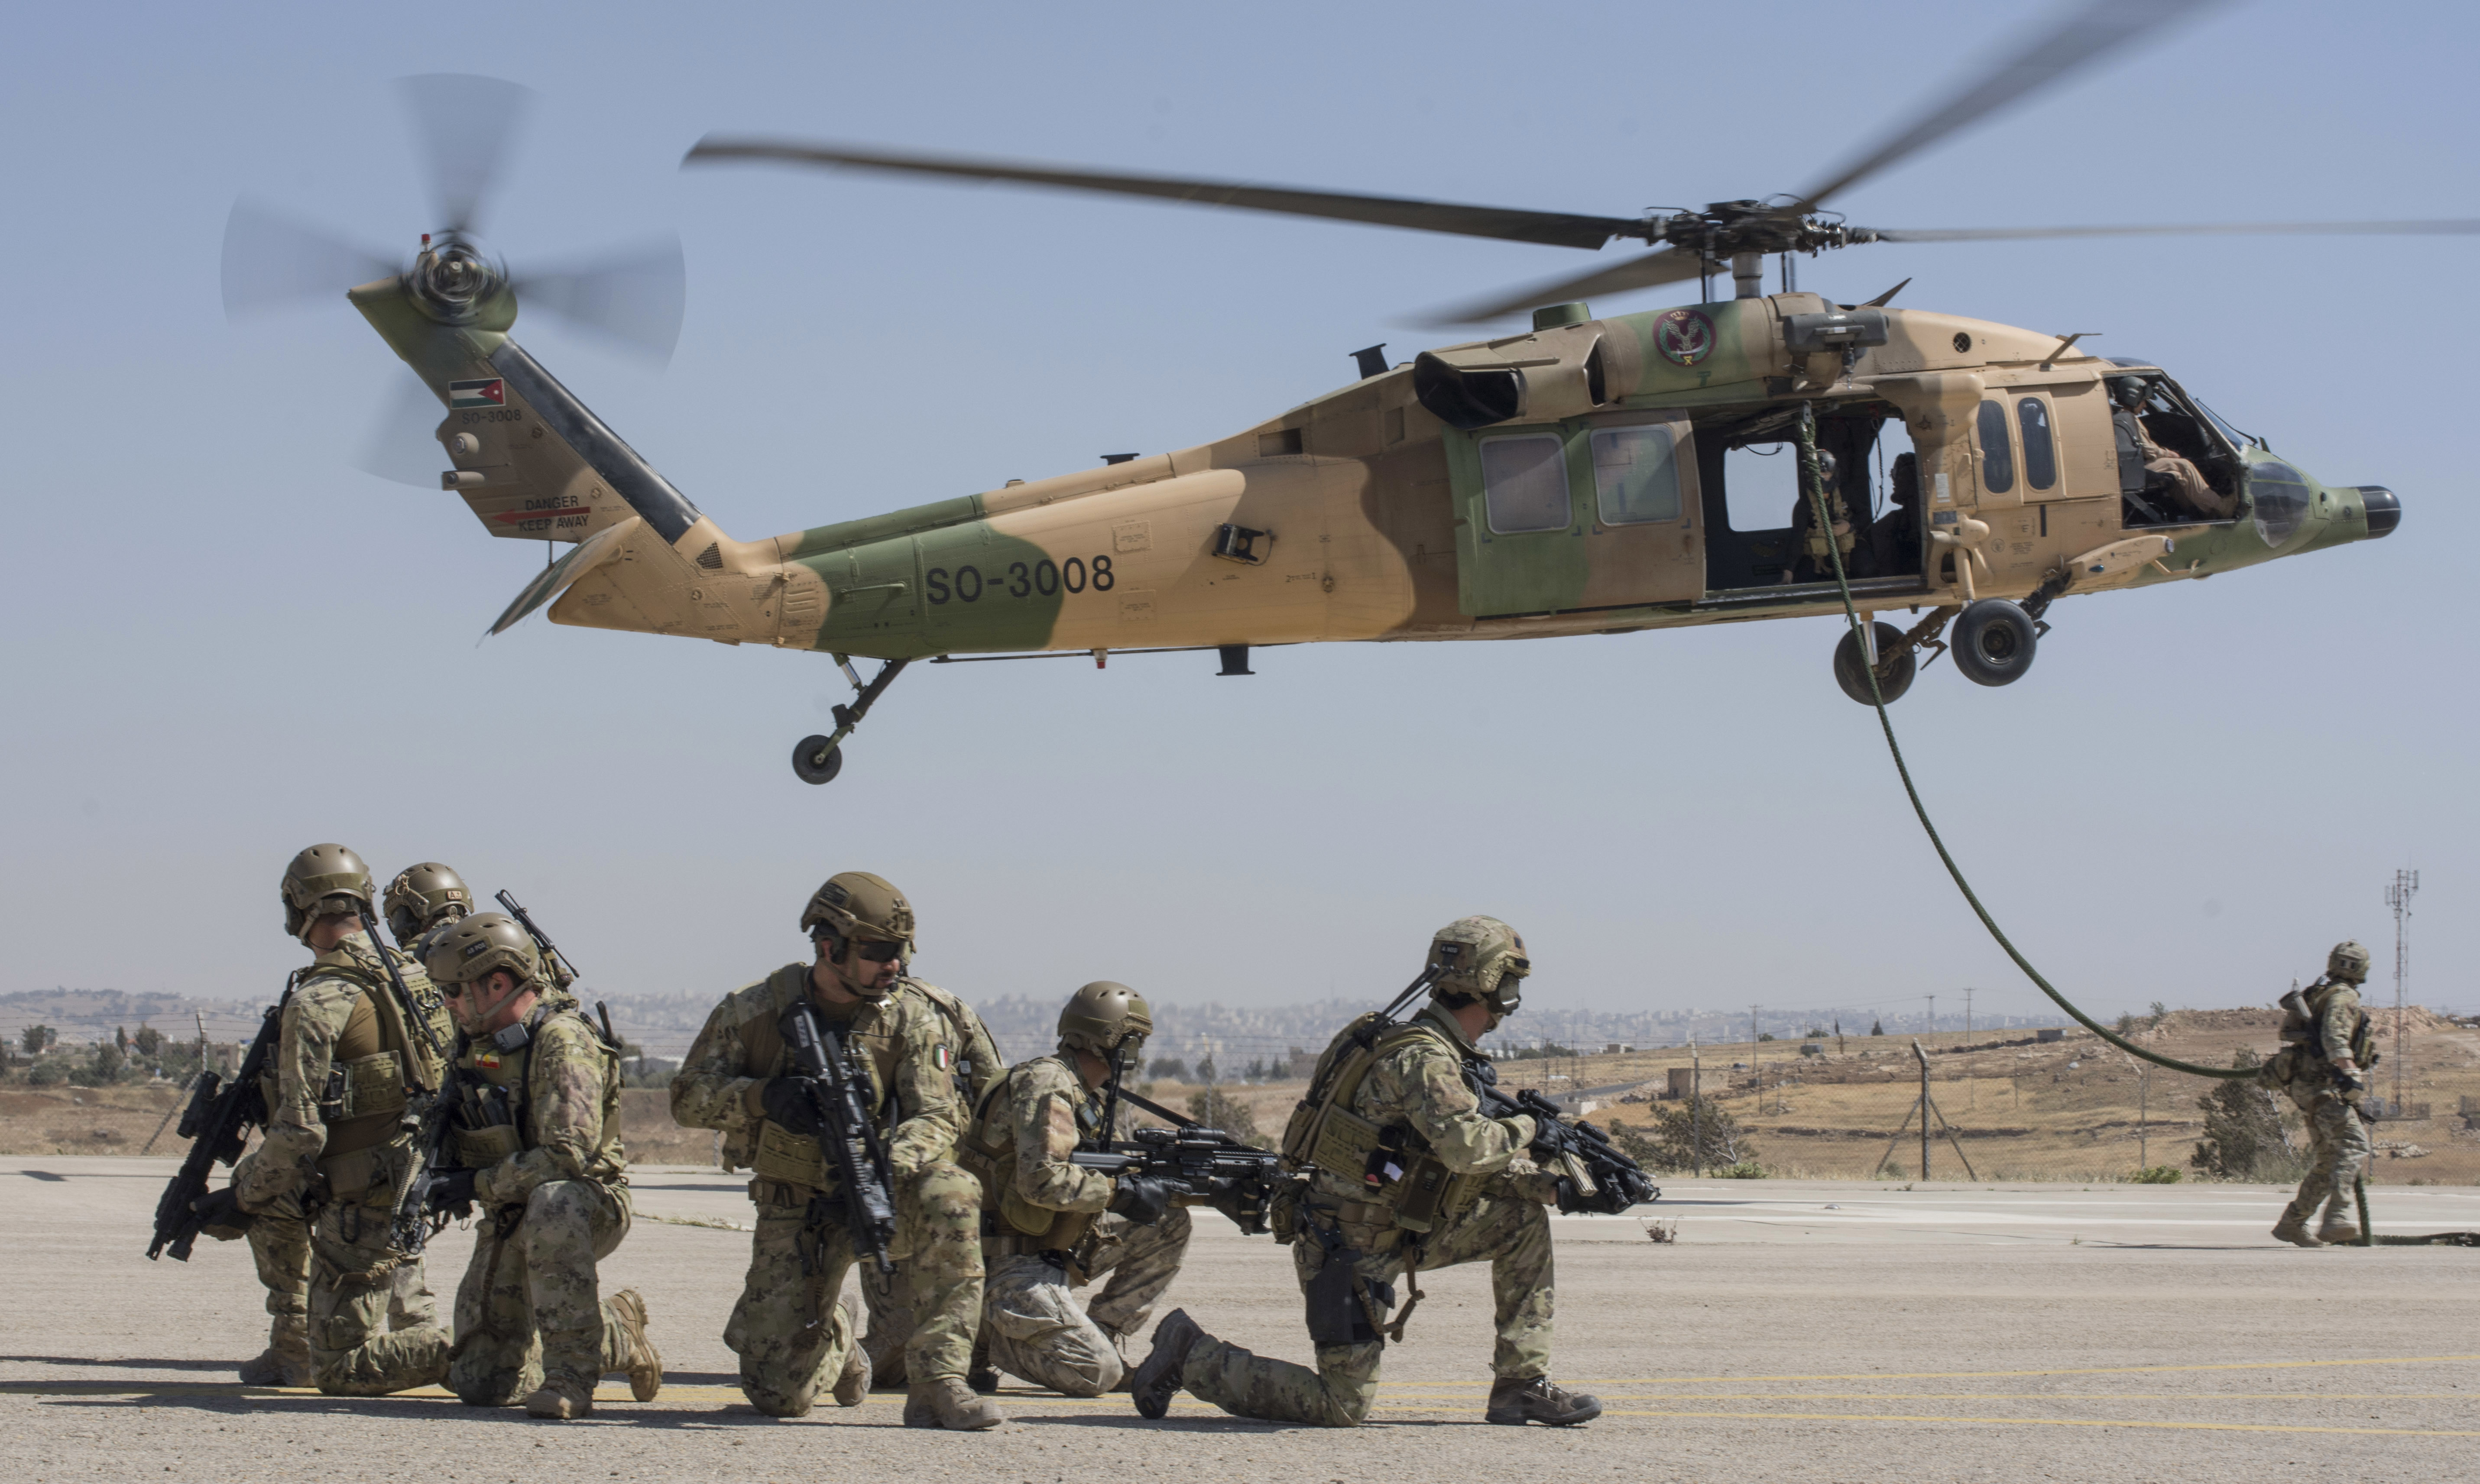 Ahead of the African Lion exercise, the FAR is participating in the “Eager Lion” maneuvers in Jordan